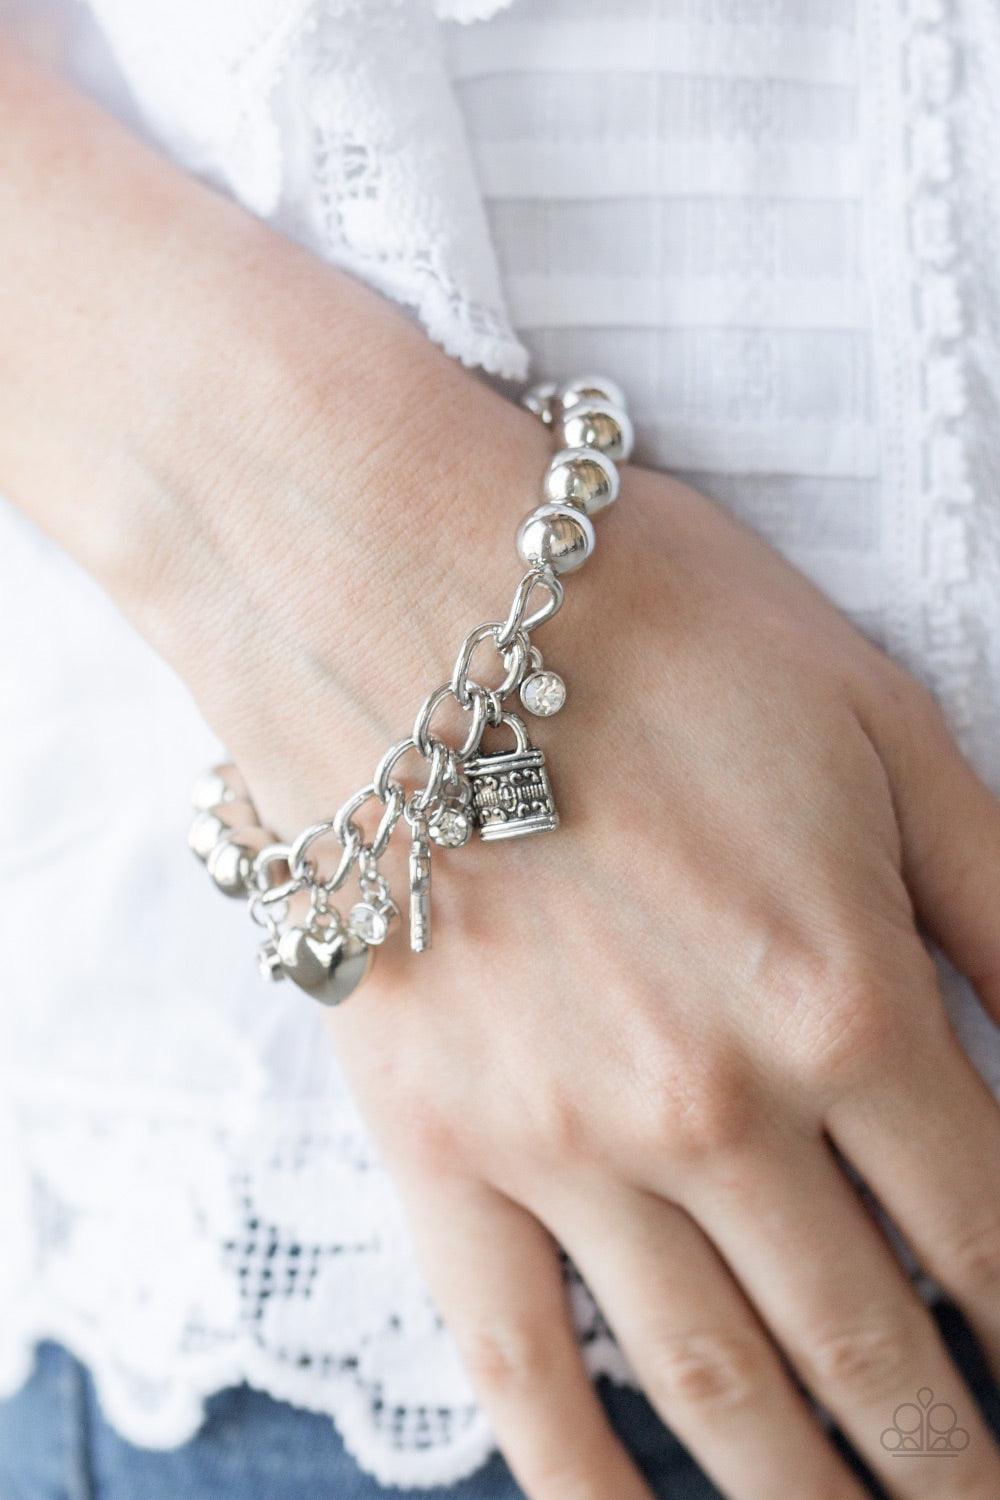 Paparazzi Accessories Feelin Flirtacious - White Attached to a section of silver chain, classic silver beads are threaded along a stretchy elastic band. Glittery white rhinestones, a silver heart, a silver key, and a silver lock swing from the wrist for a